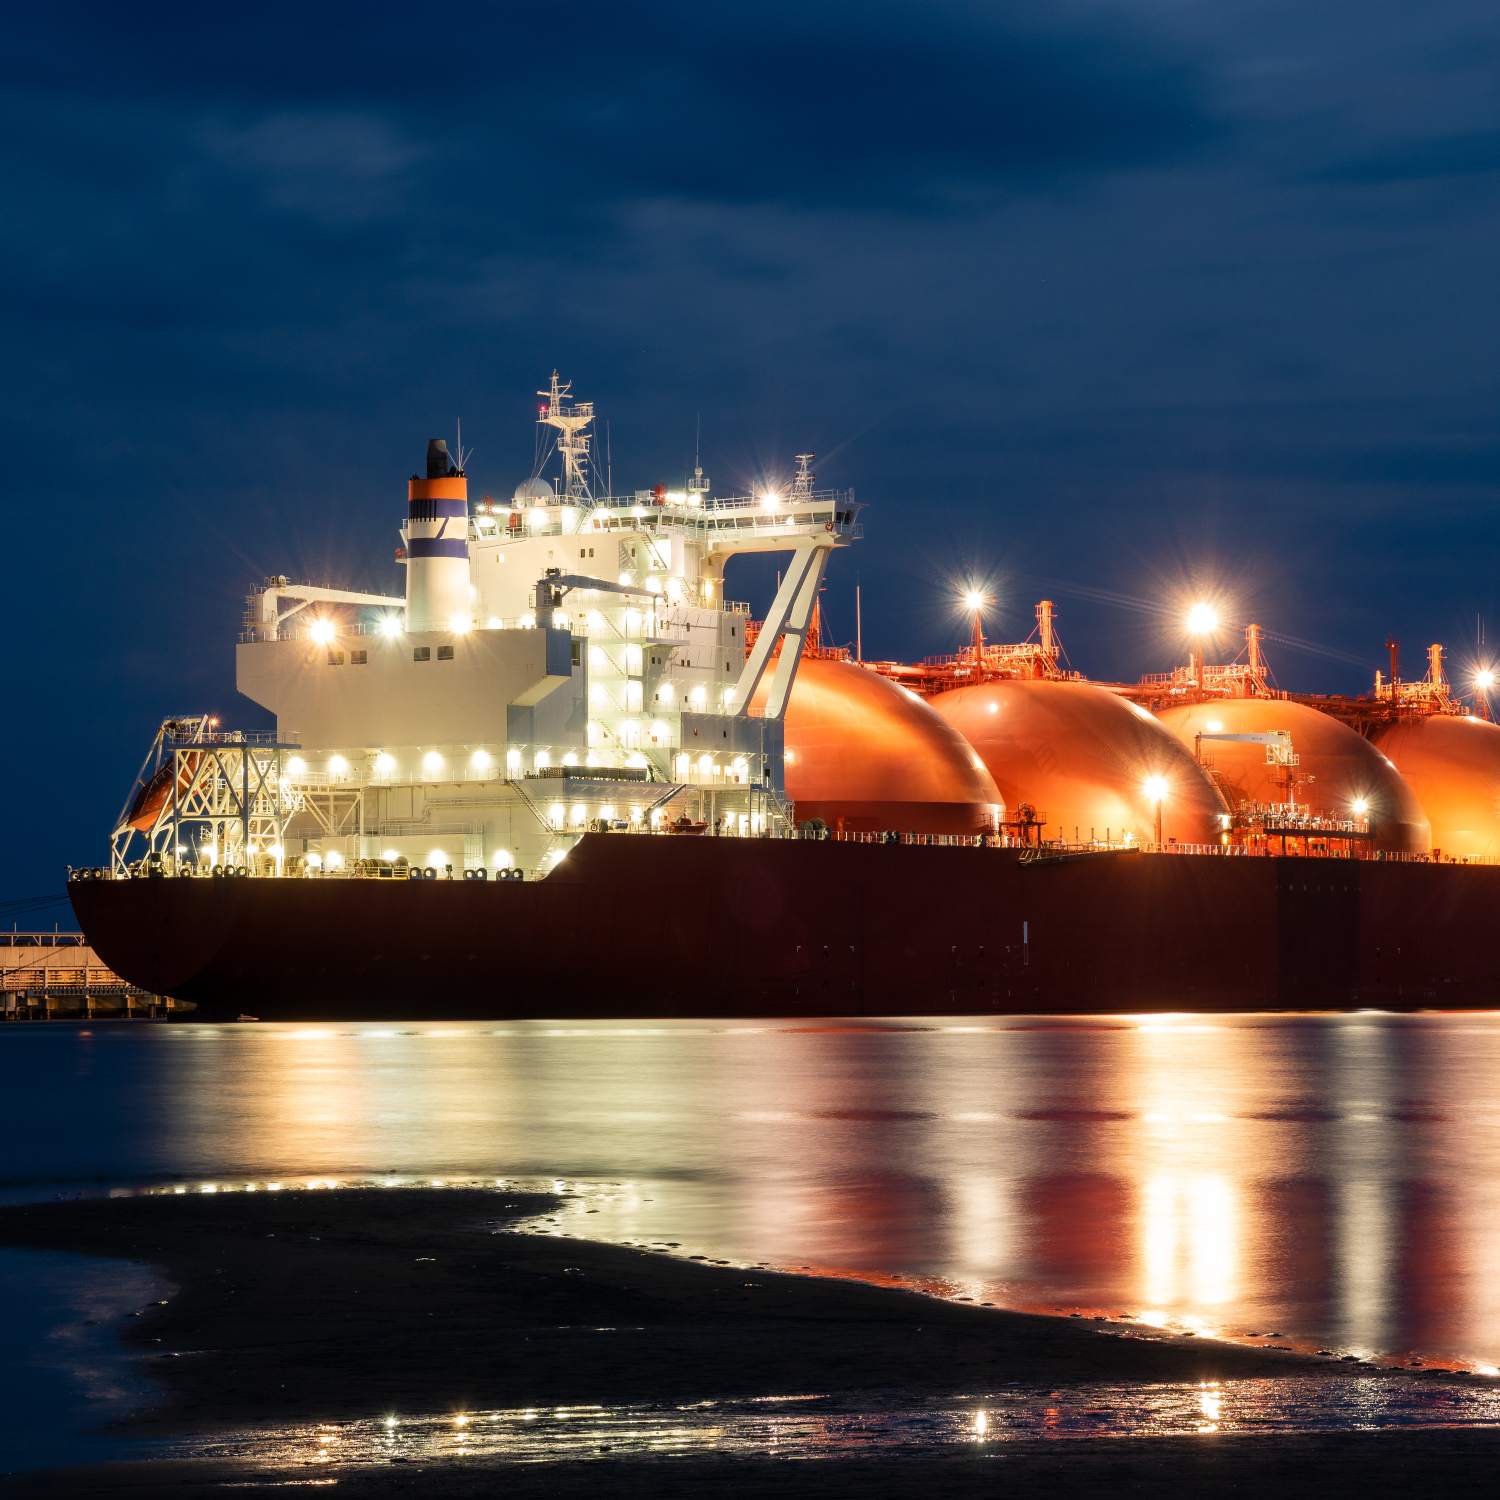 A photo of a liquefied natural gas transport tanker at night.